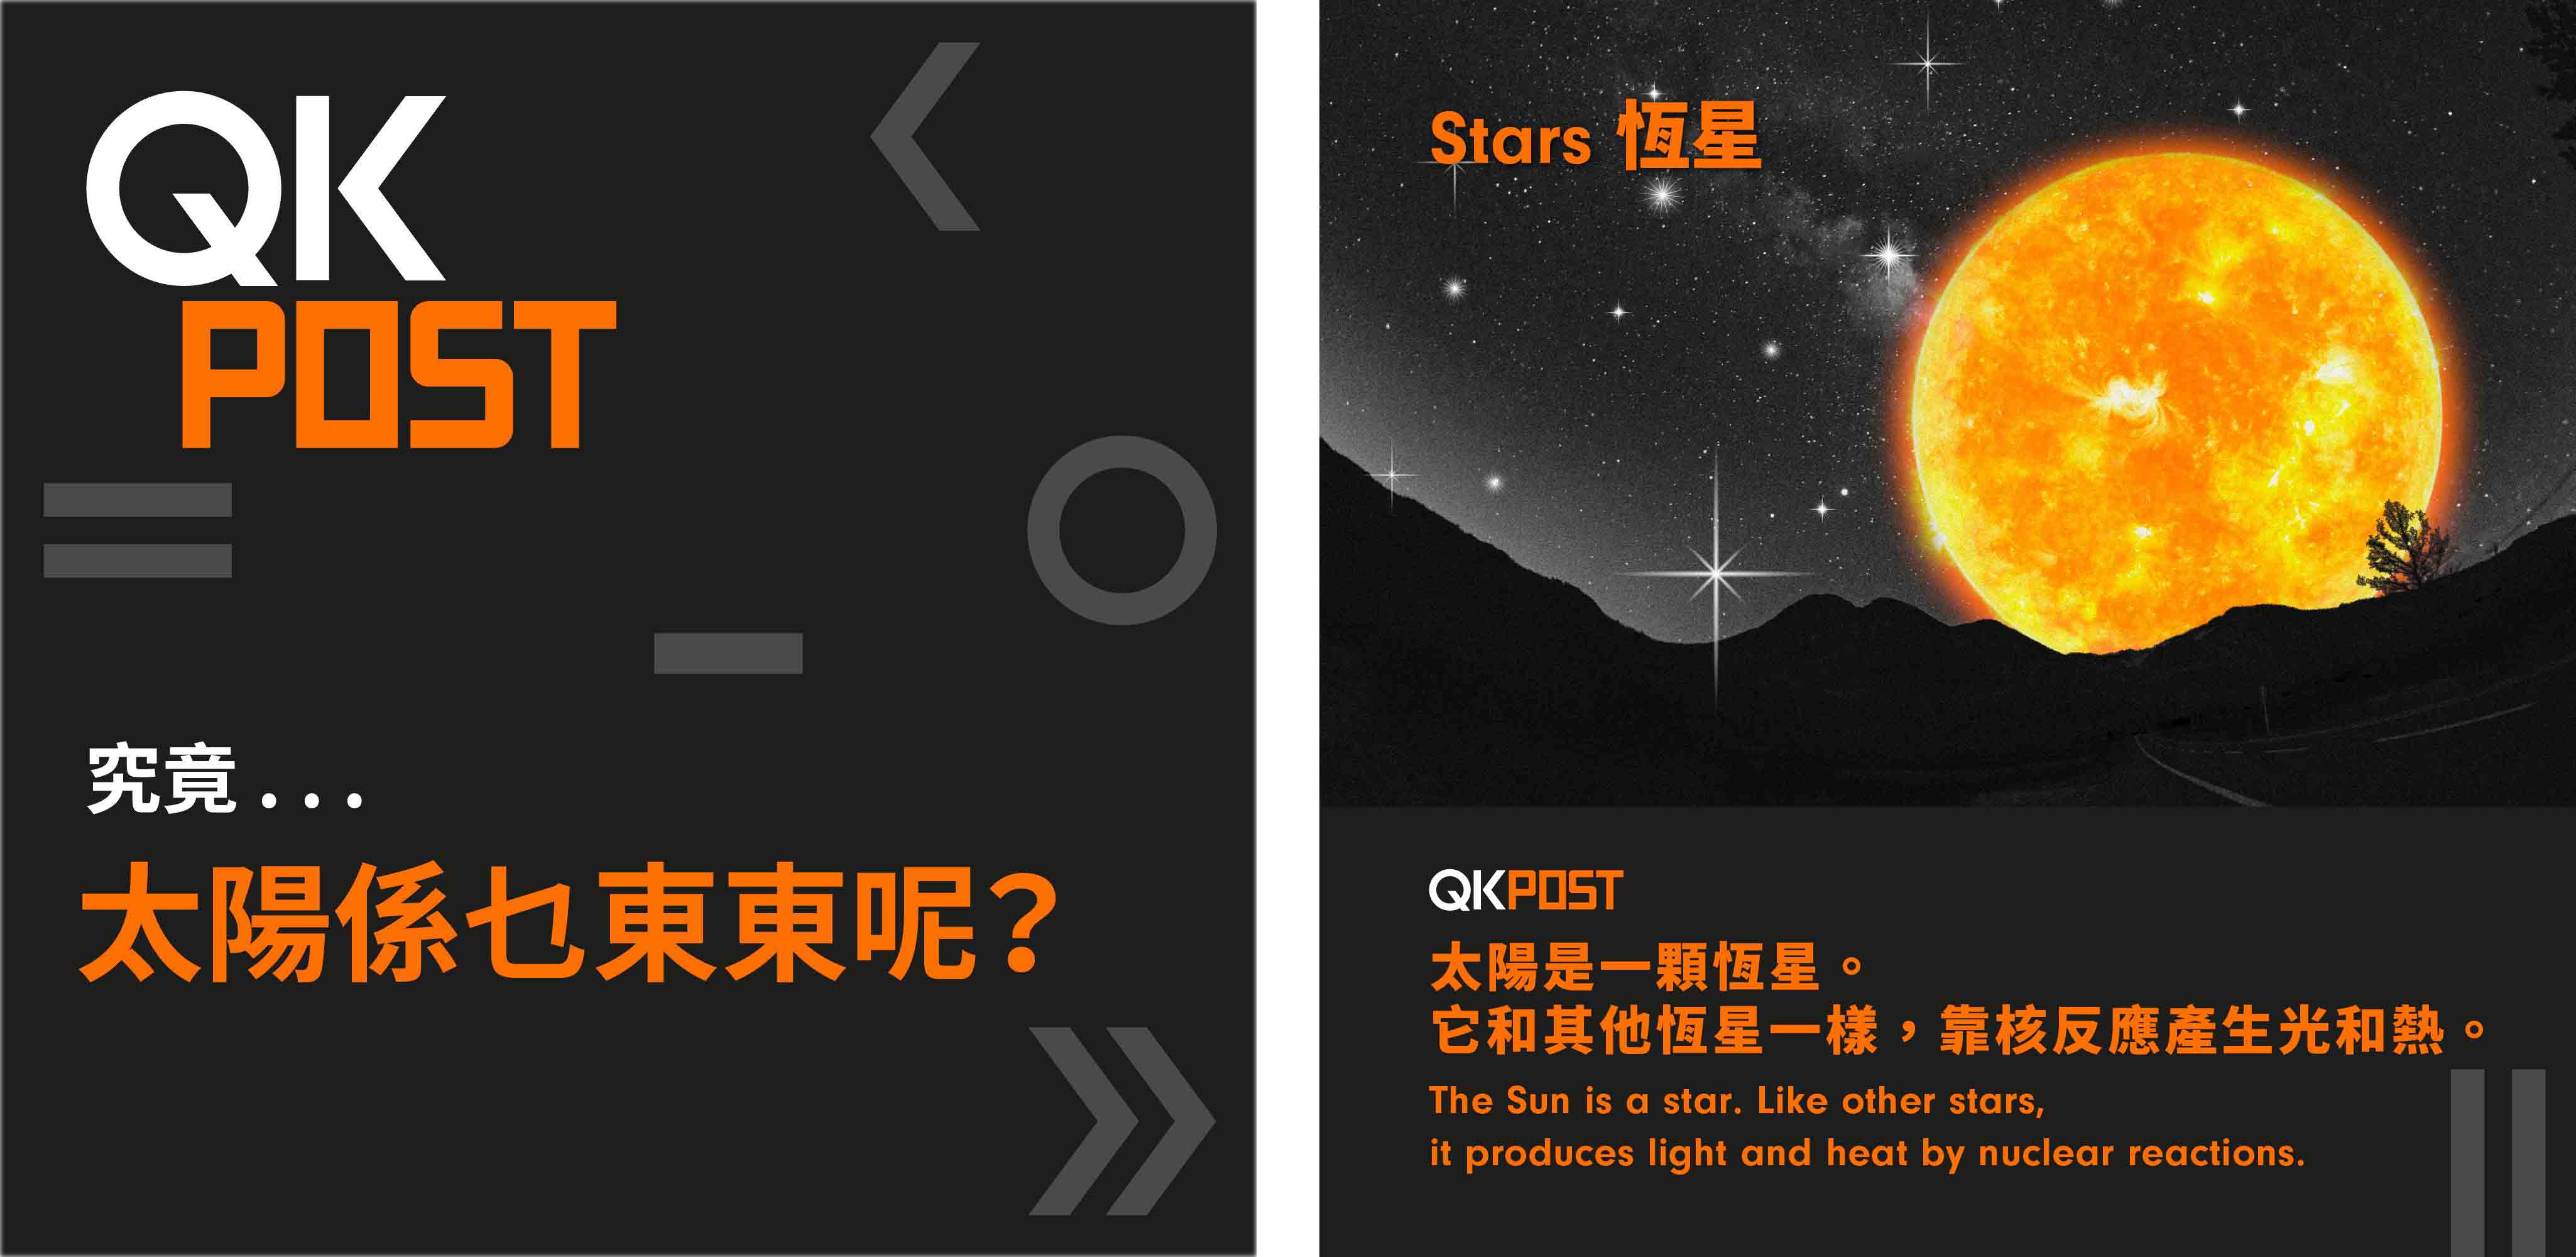 QKPOST: Science Vocabulary A to Z - S for Stars